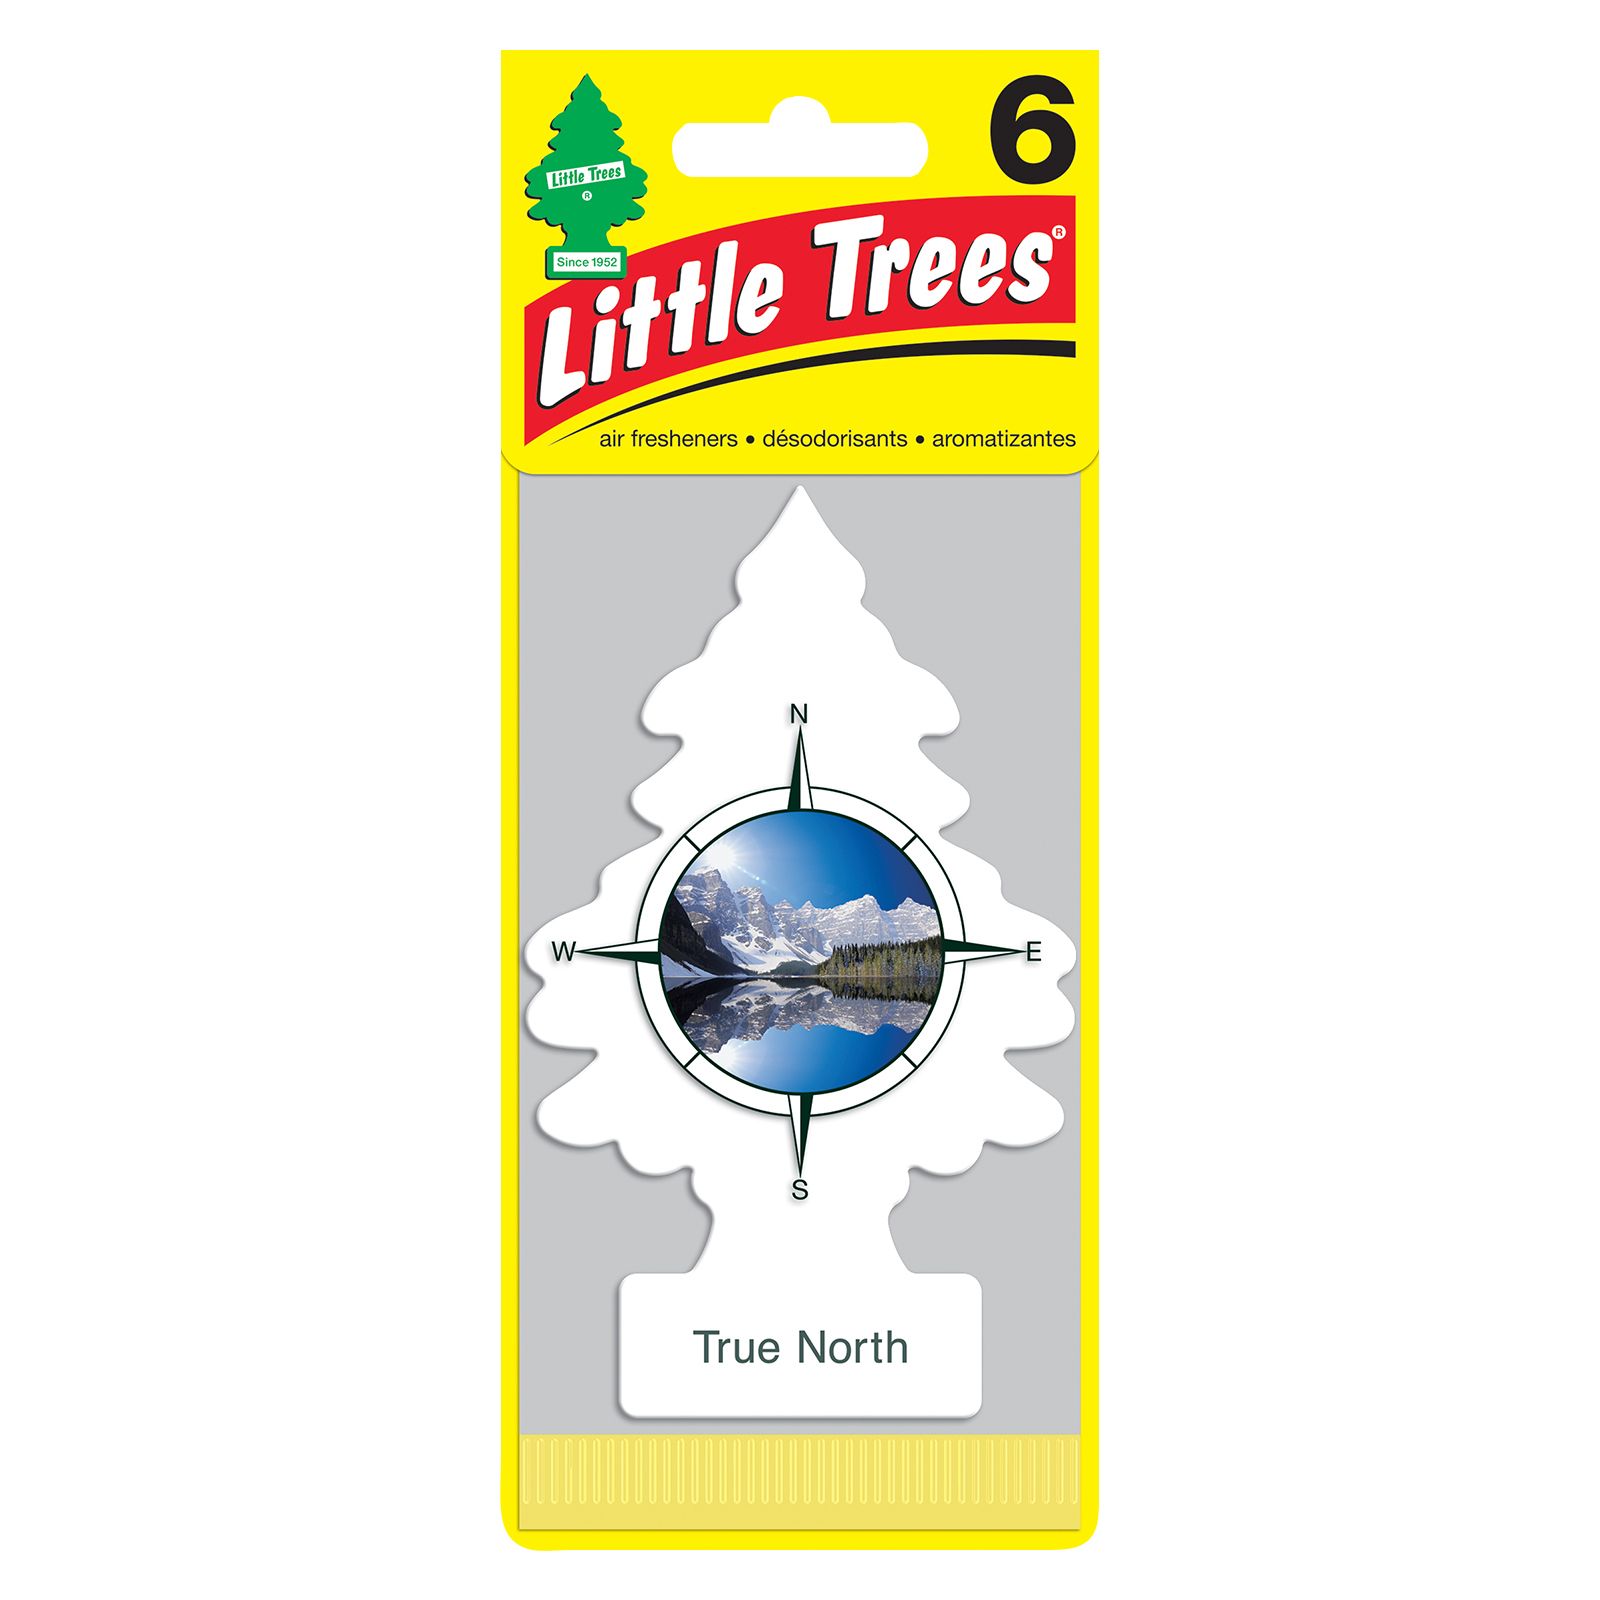 Little Tree New Car Scent Air Fresheners, 6 pk.